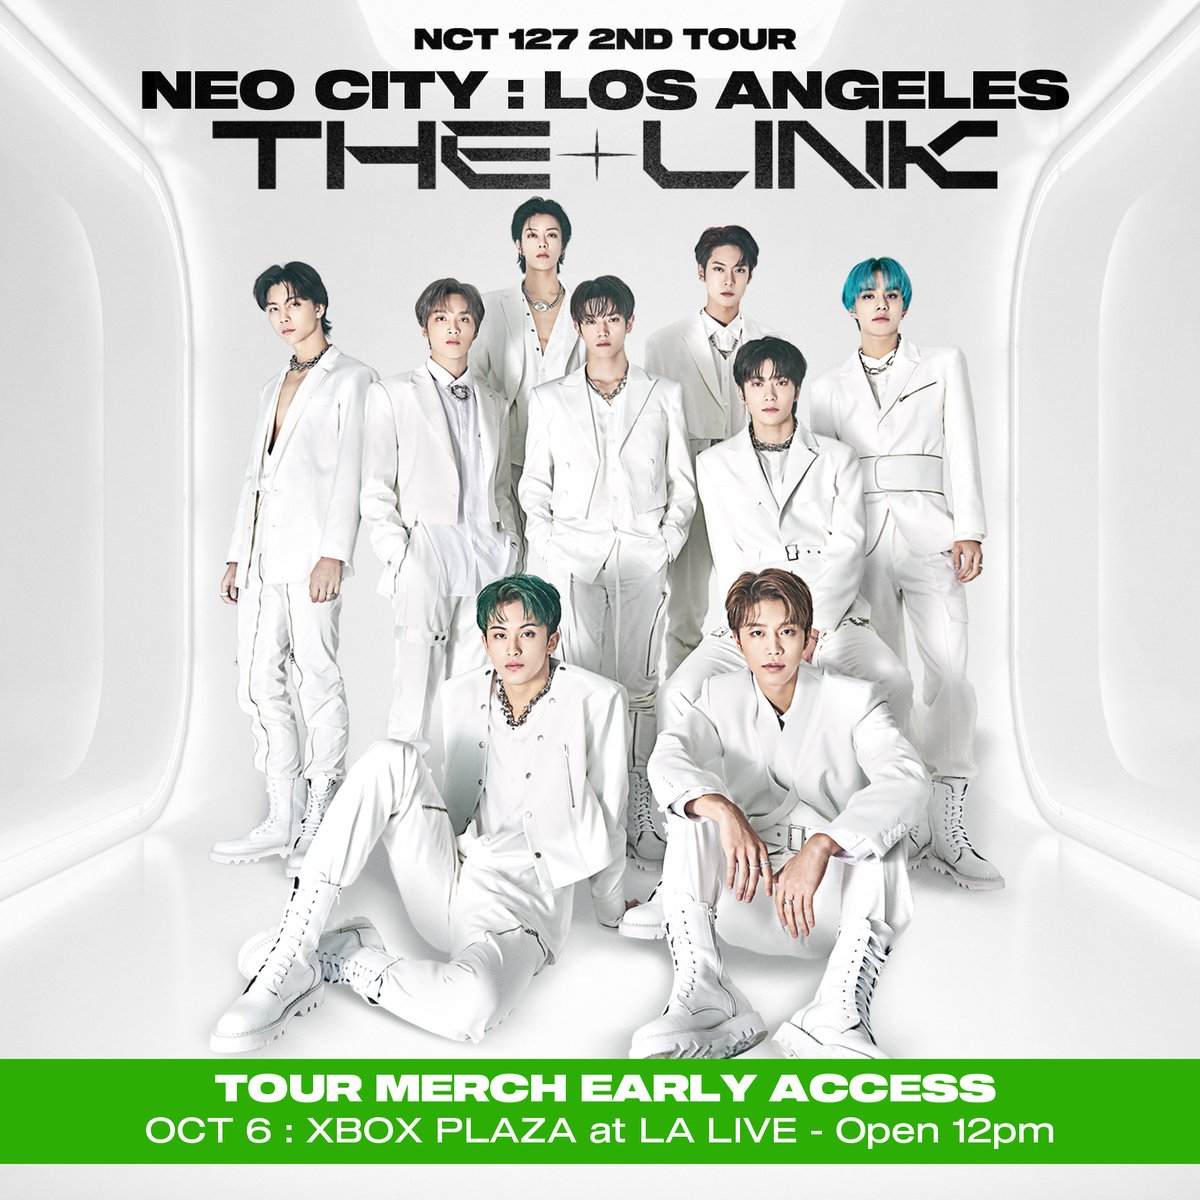 Image for Today is the day! Come and grab your tour merch and show your love and support to NCT 127! The official tour merch is available at XBOX Plaza at LA Live, and the booth will be open from 12pm! See you soon!💚 NCT127inLA NEOCITY_THE_LINK_LA https://t.co/2bft5QNHv1